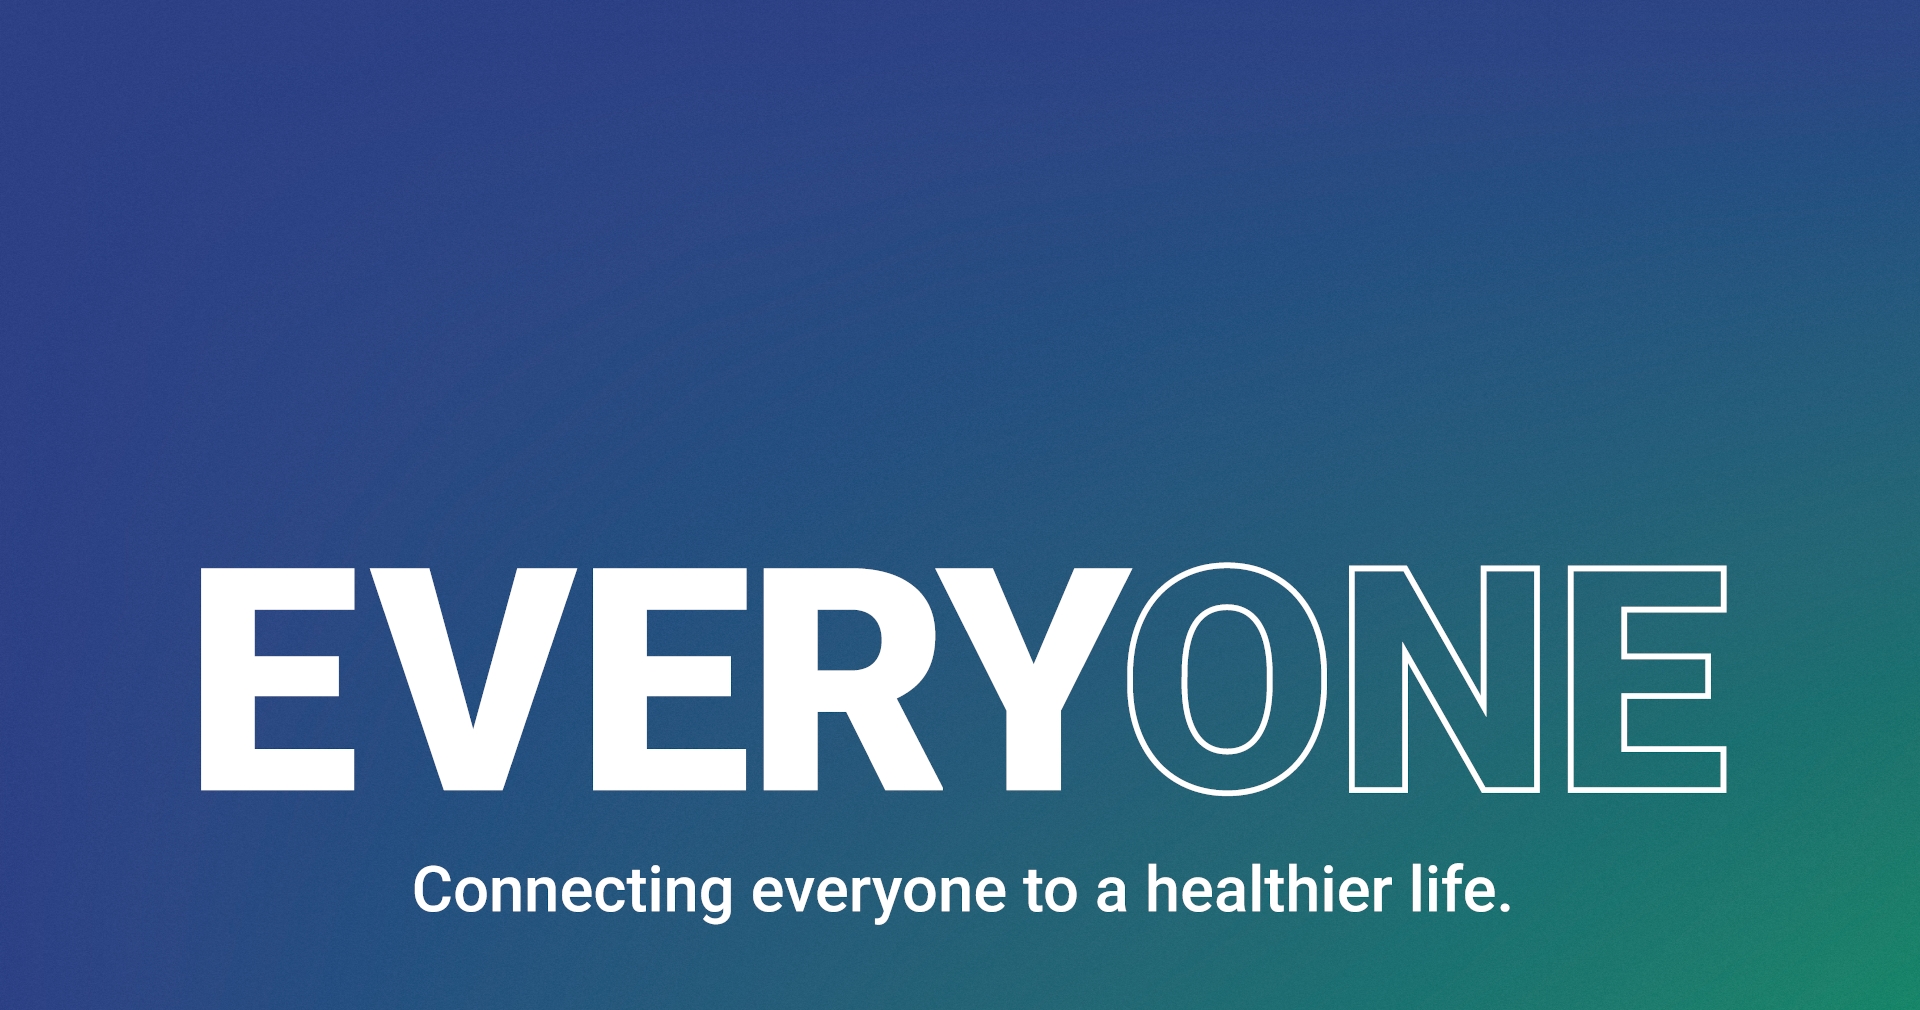 Background image that reads: Everyone - Connecting everyone to a healthier life.